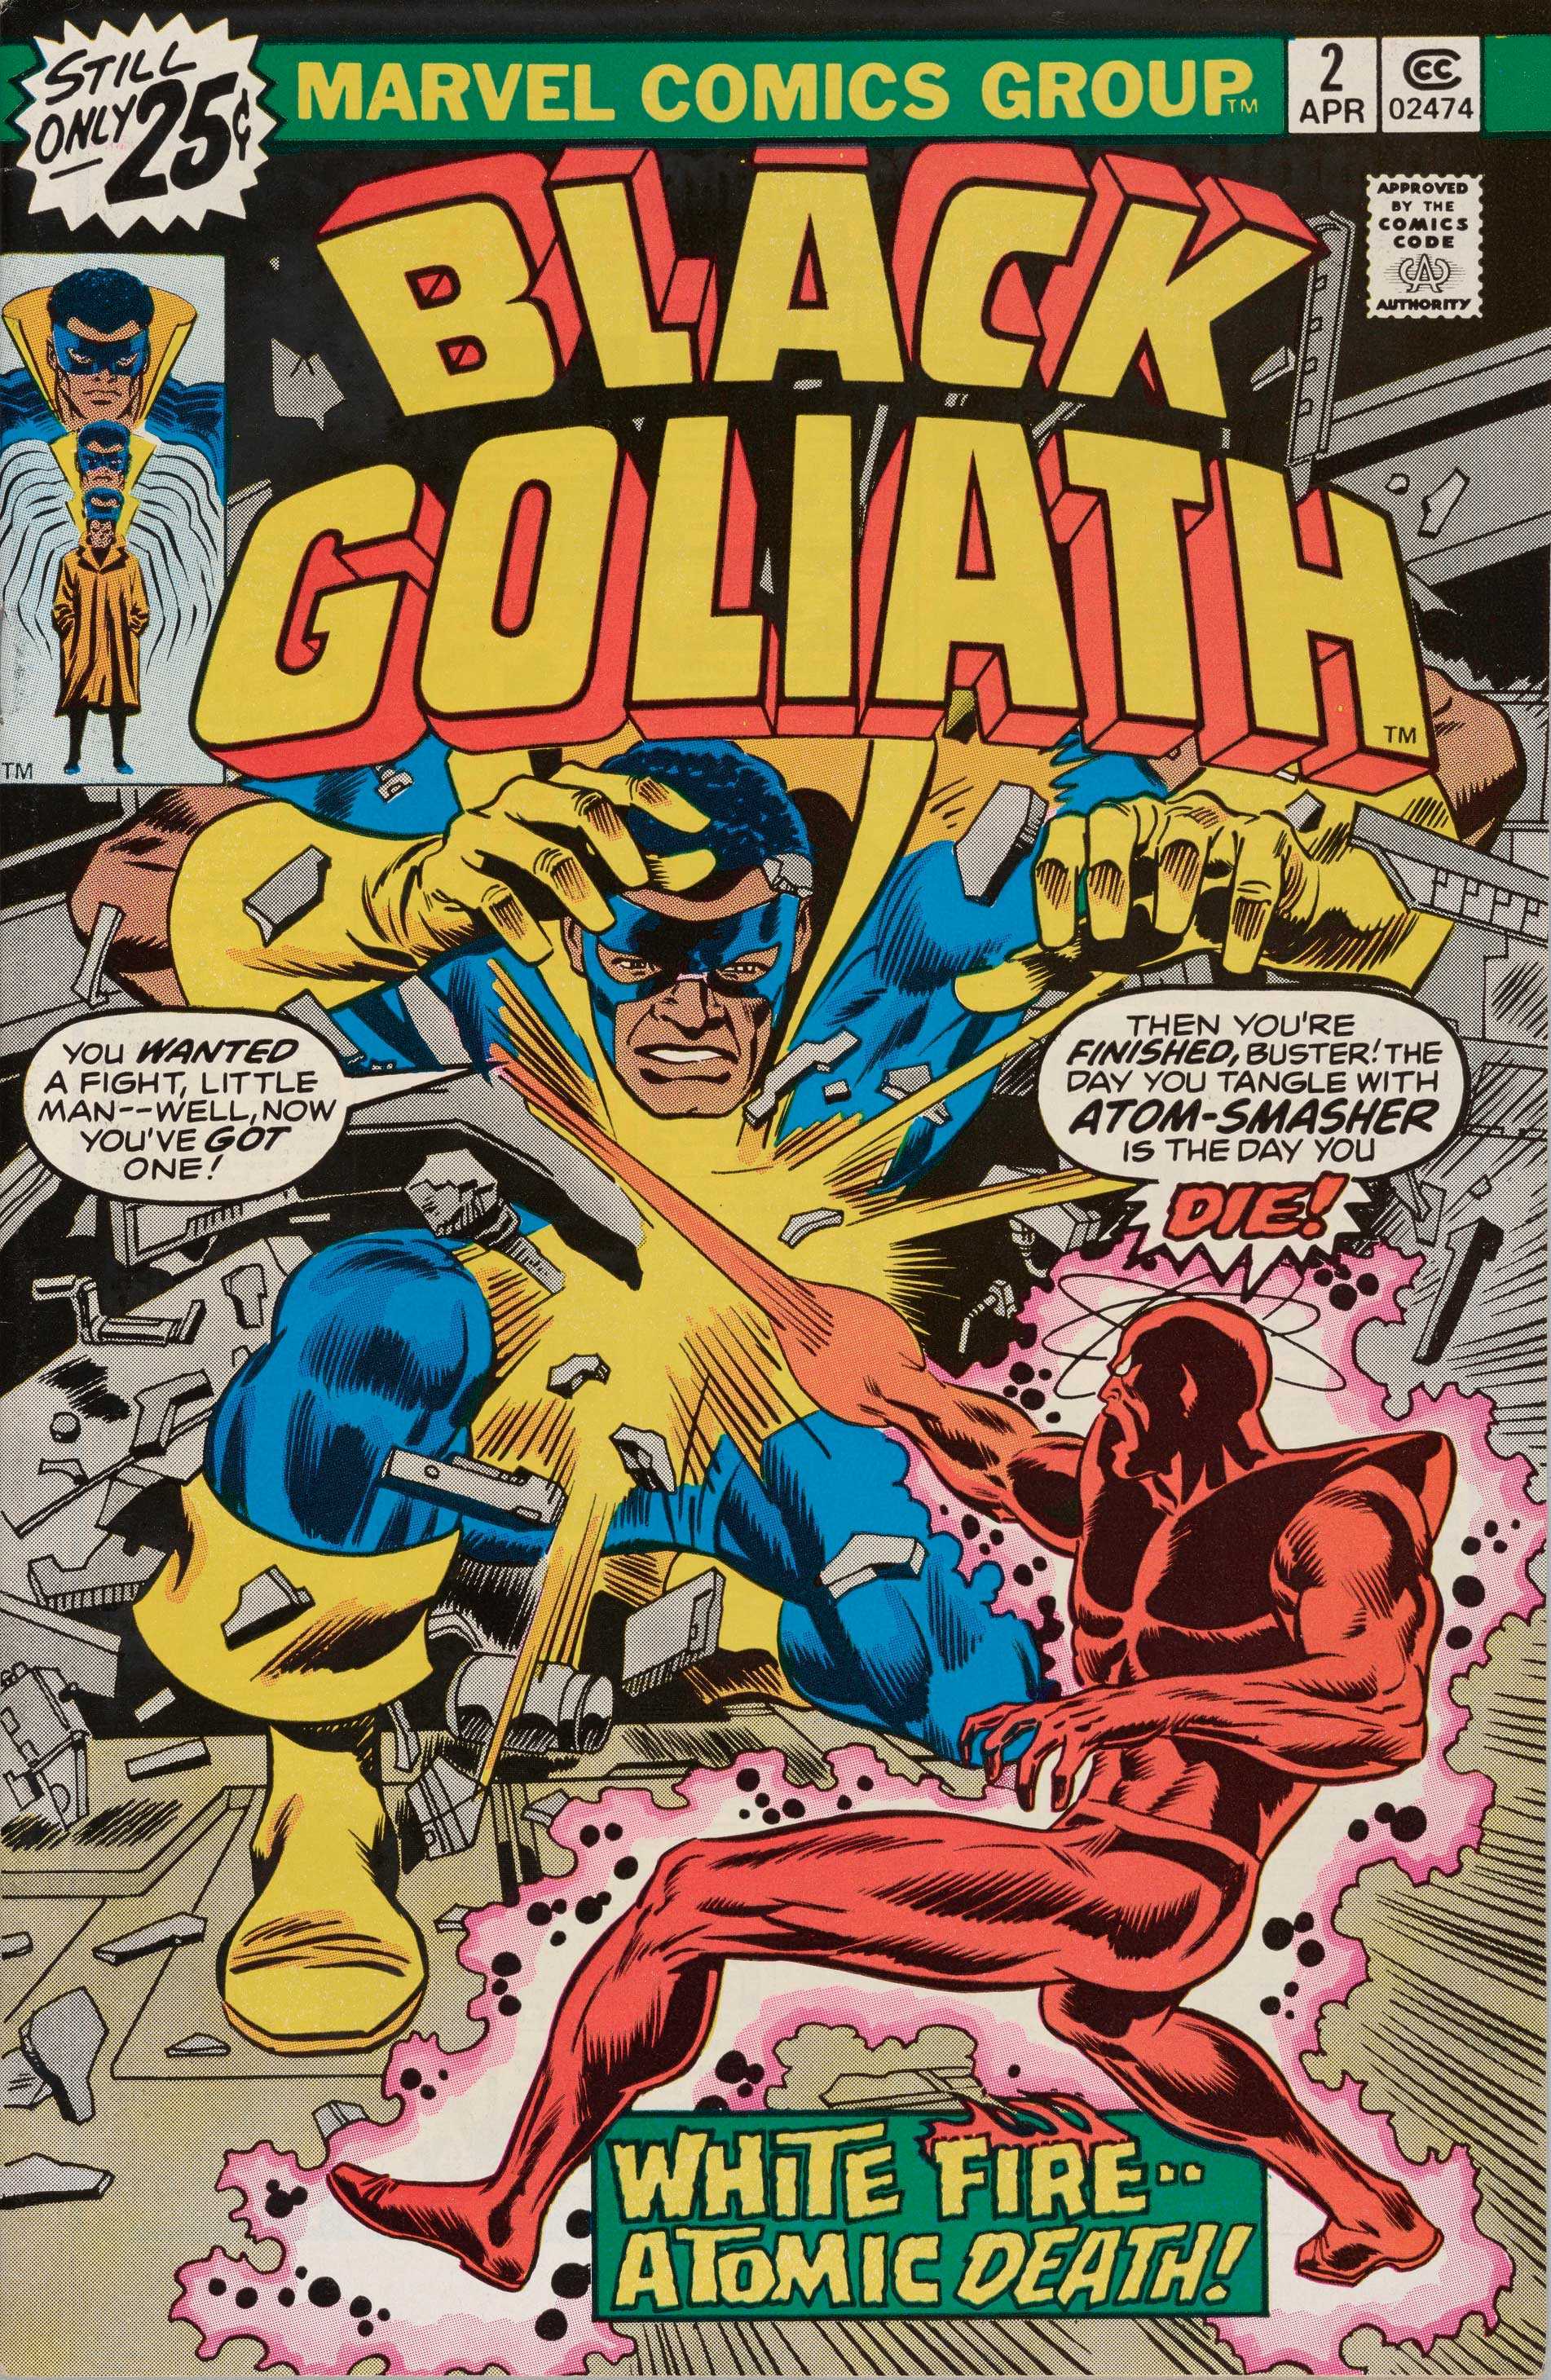 Black Goliath battling the Atom-Smasher on the cover of Black Goliath #2 in typical comic artwork.